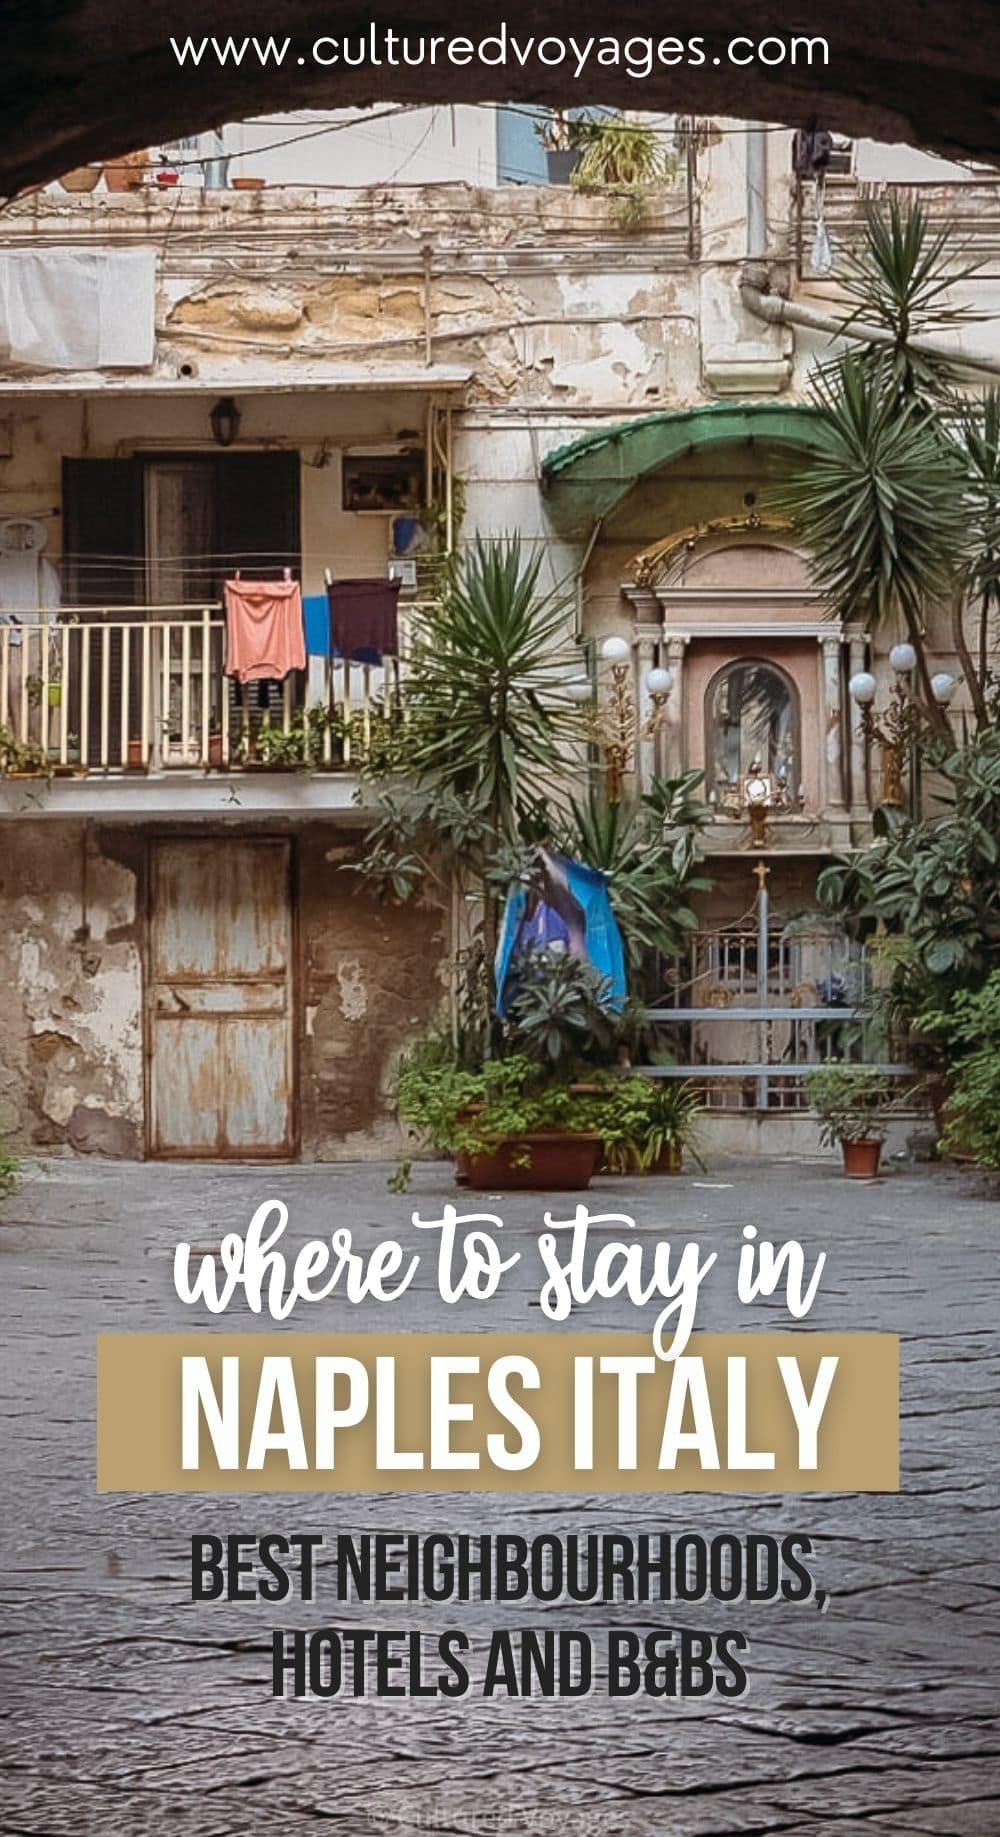 where to stay in naples pin cover, with image of apartment in peeling baroque building with laundry hanging from the balcony